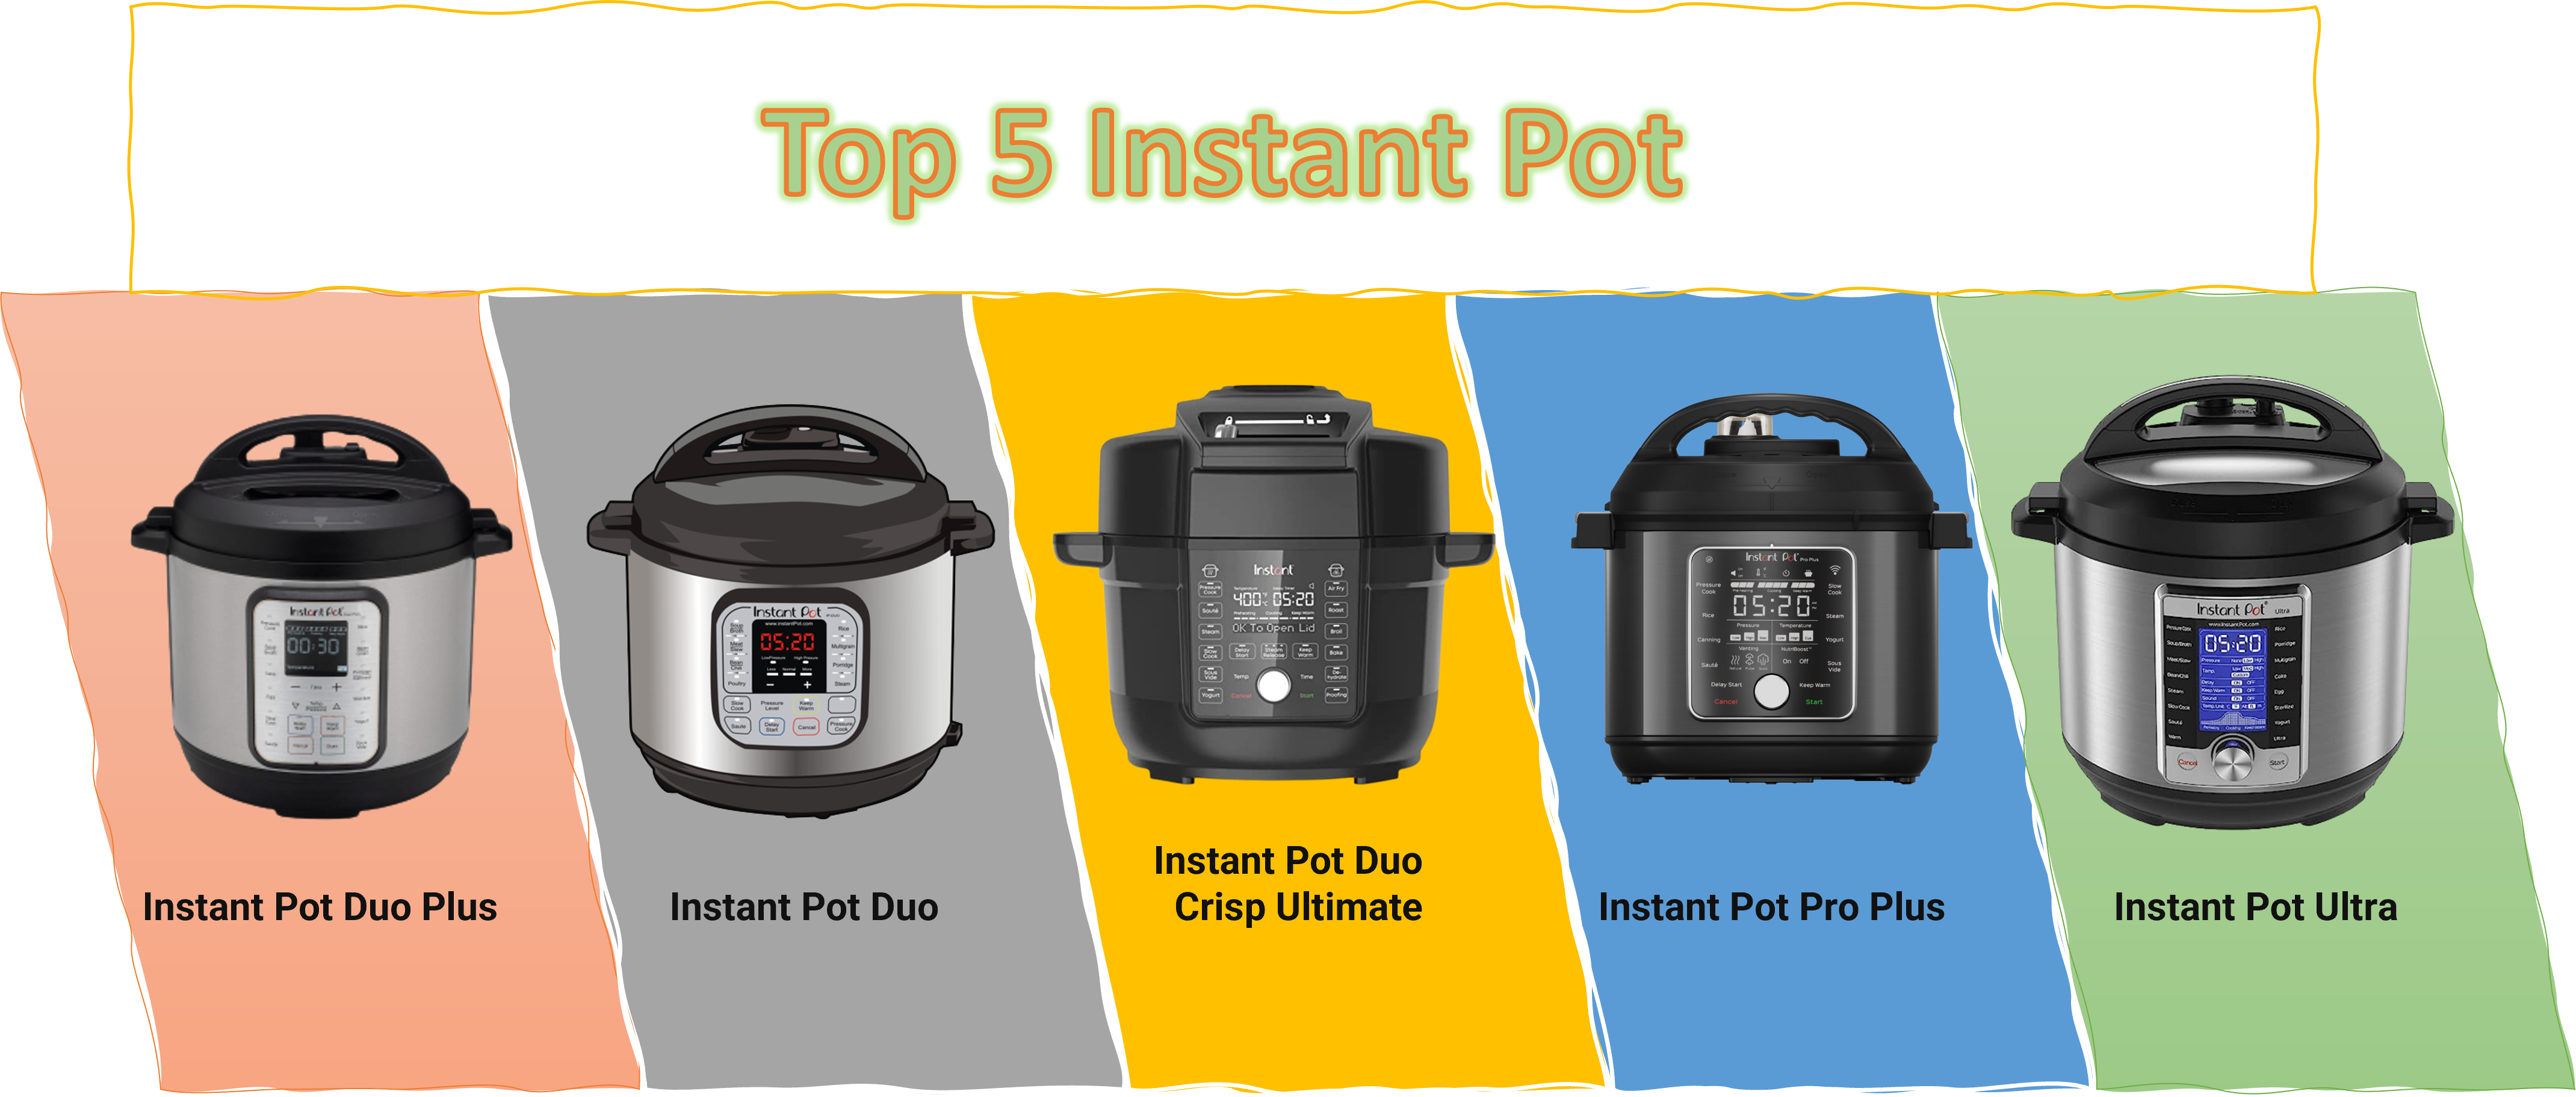 Top 5 Instant Pot (highly rated)